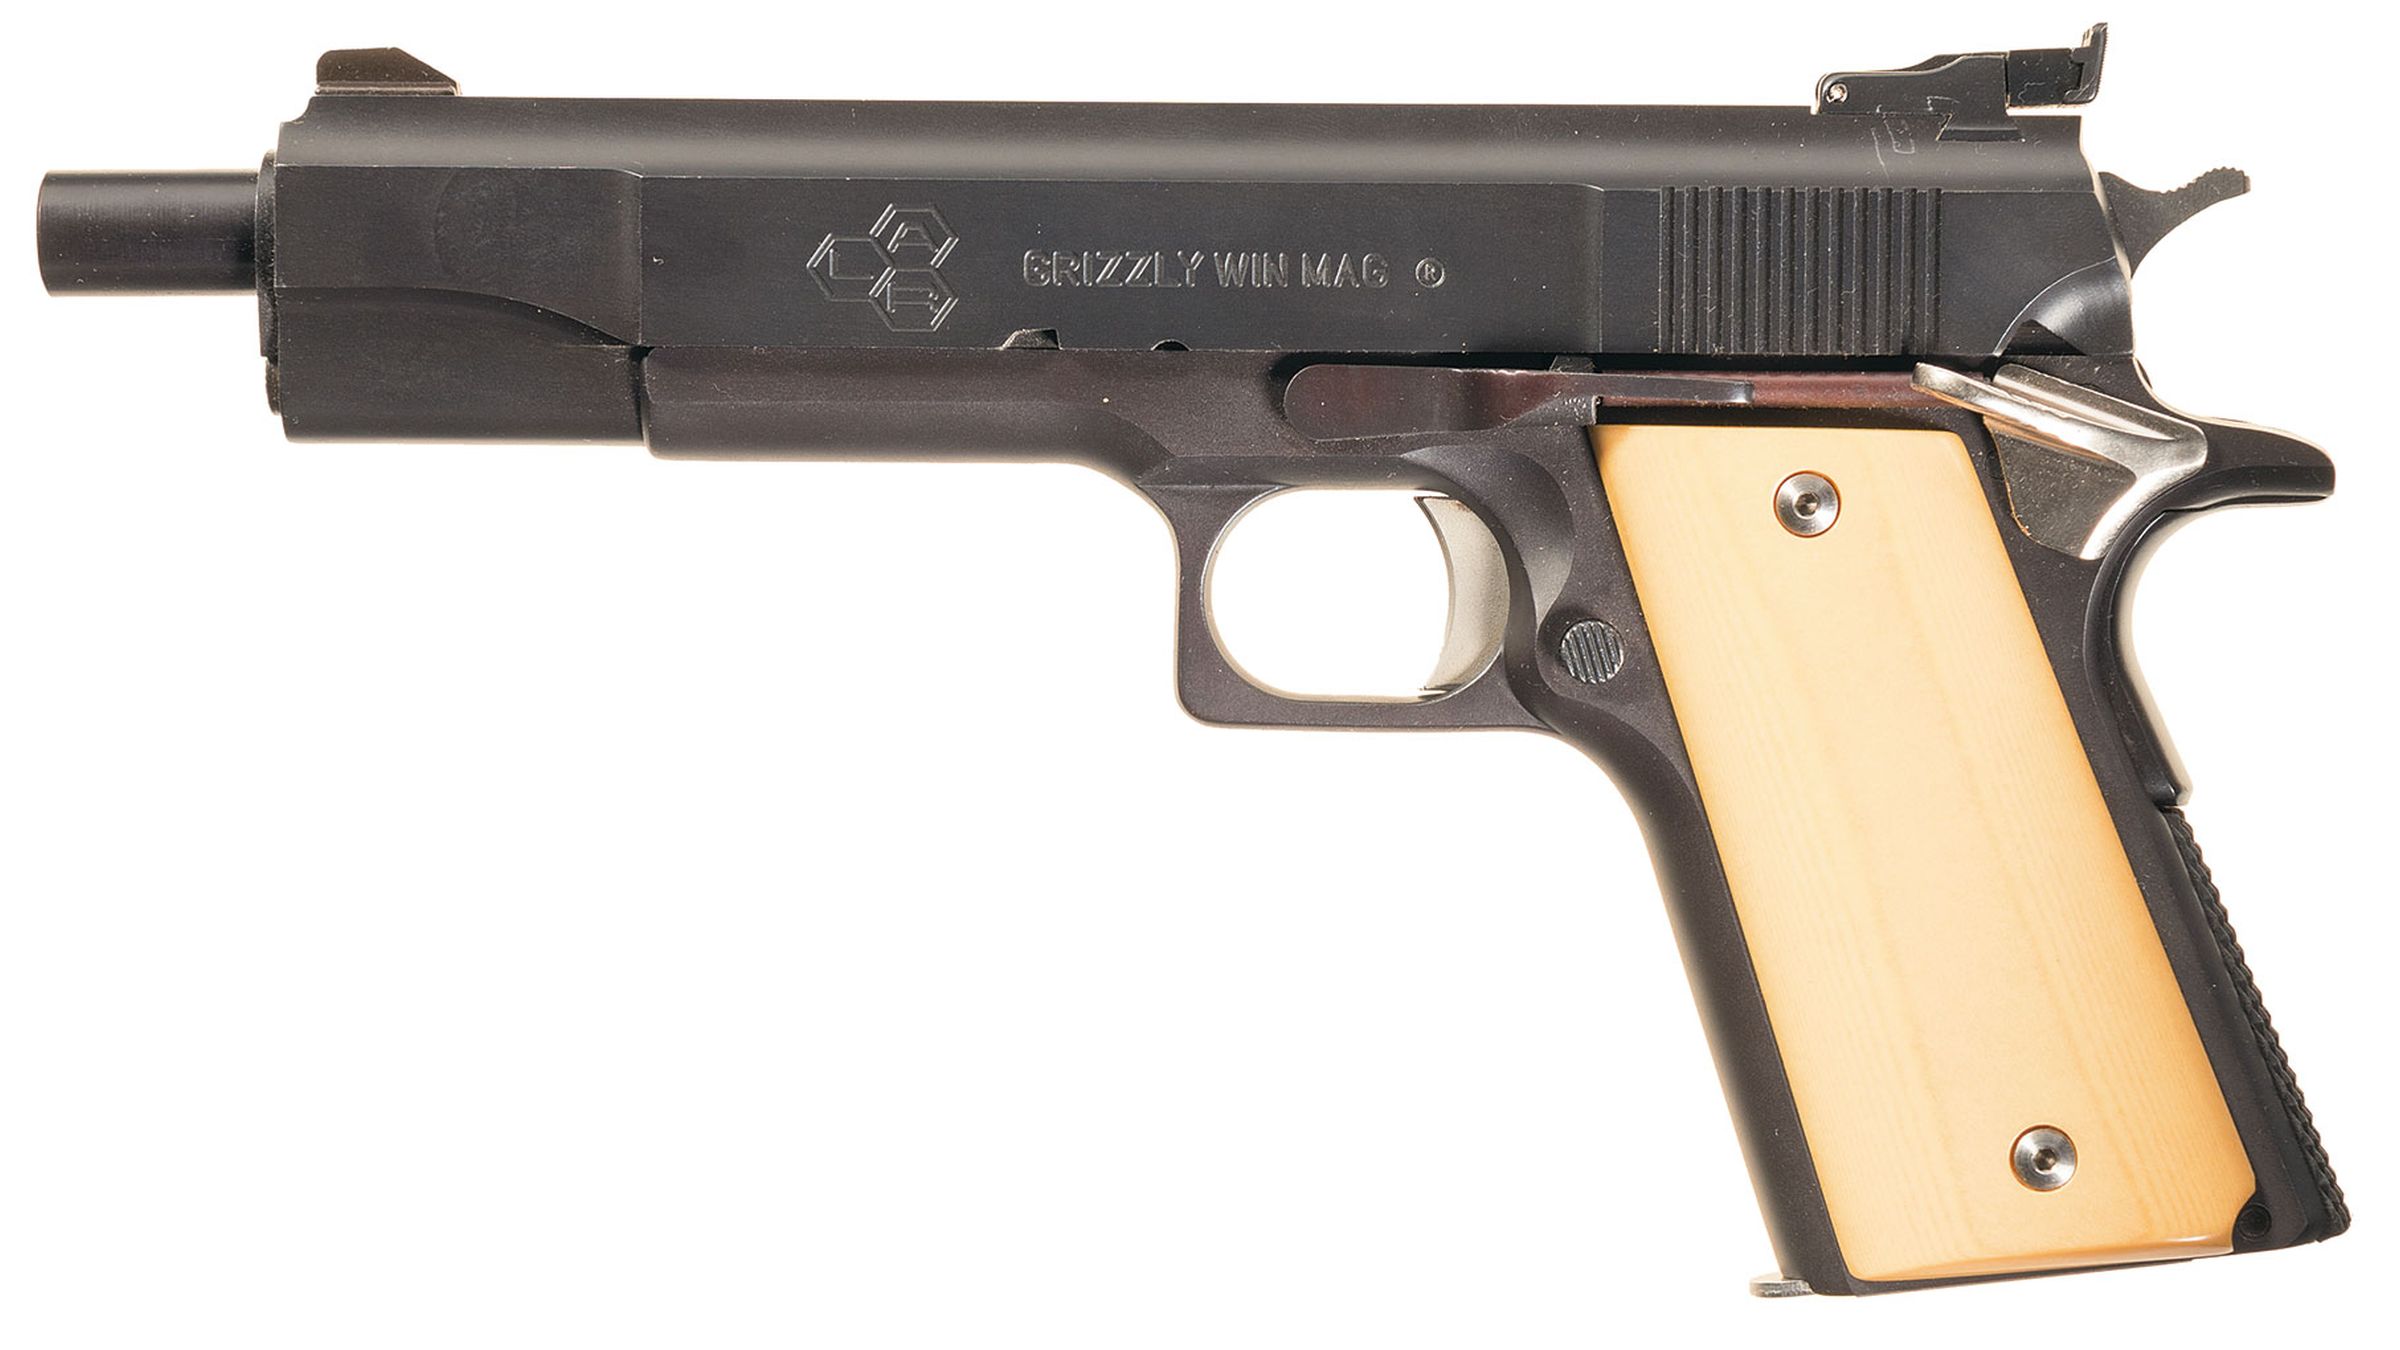 LAR Grizzly Win Mag Mark I Semi-Automatic Pistol | Rock Island Auction